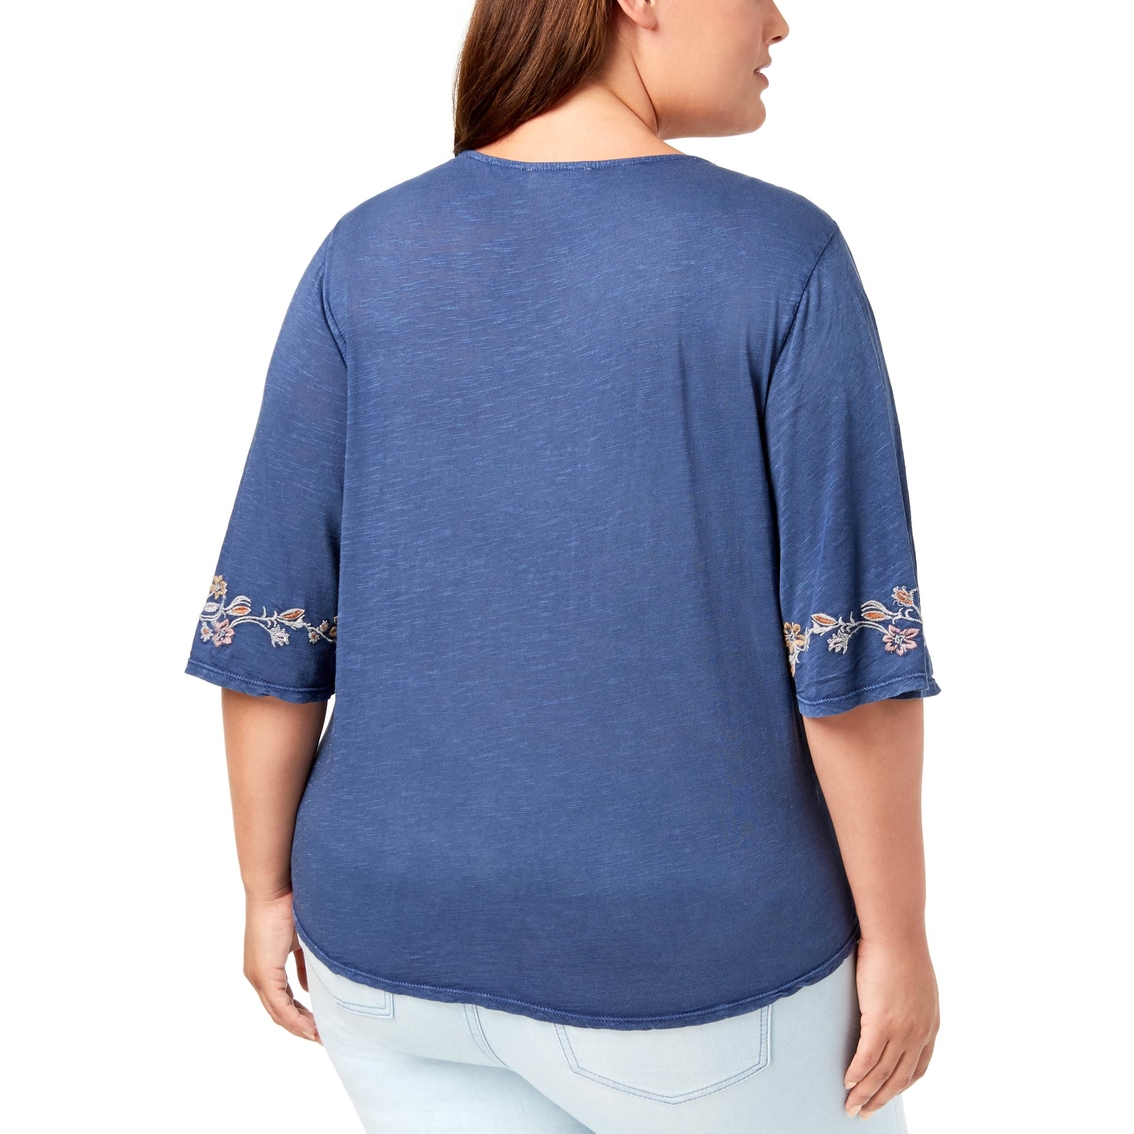 Style & Co. Plus Size Lace Up Embroidered Peasant Top - Image 2 of 2